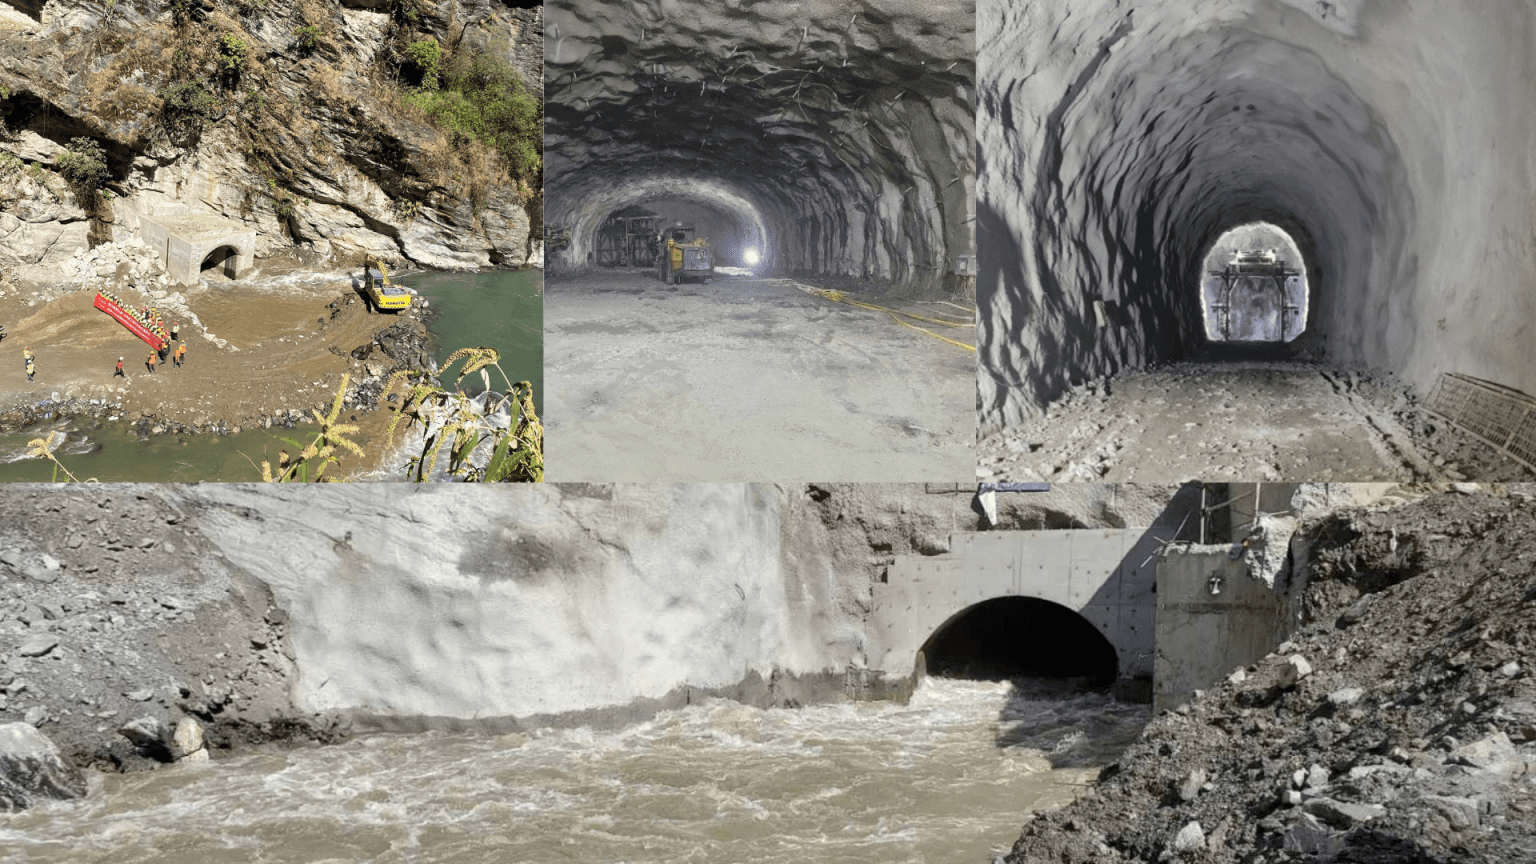 The Diversion Tunnel of the 216 MW UT-1 Project completed